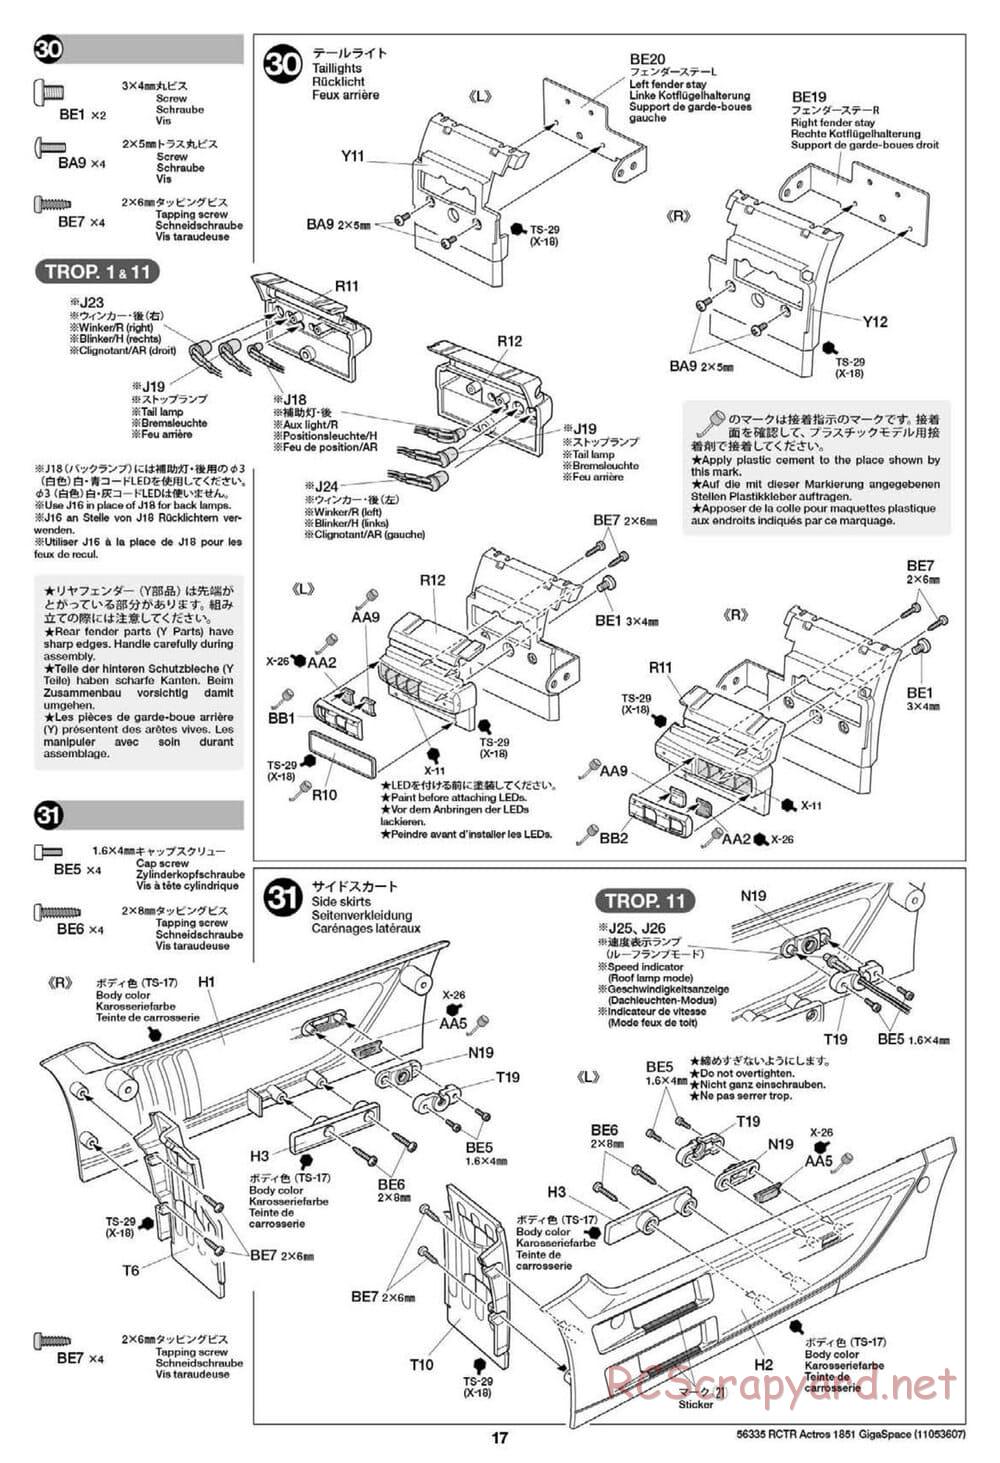 Tamiya - Mercedes-Benz Actros 1851 Gigaspace Tractor Truck Chassis - Manual - Page 17